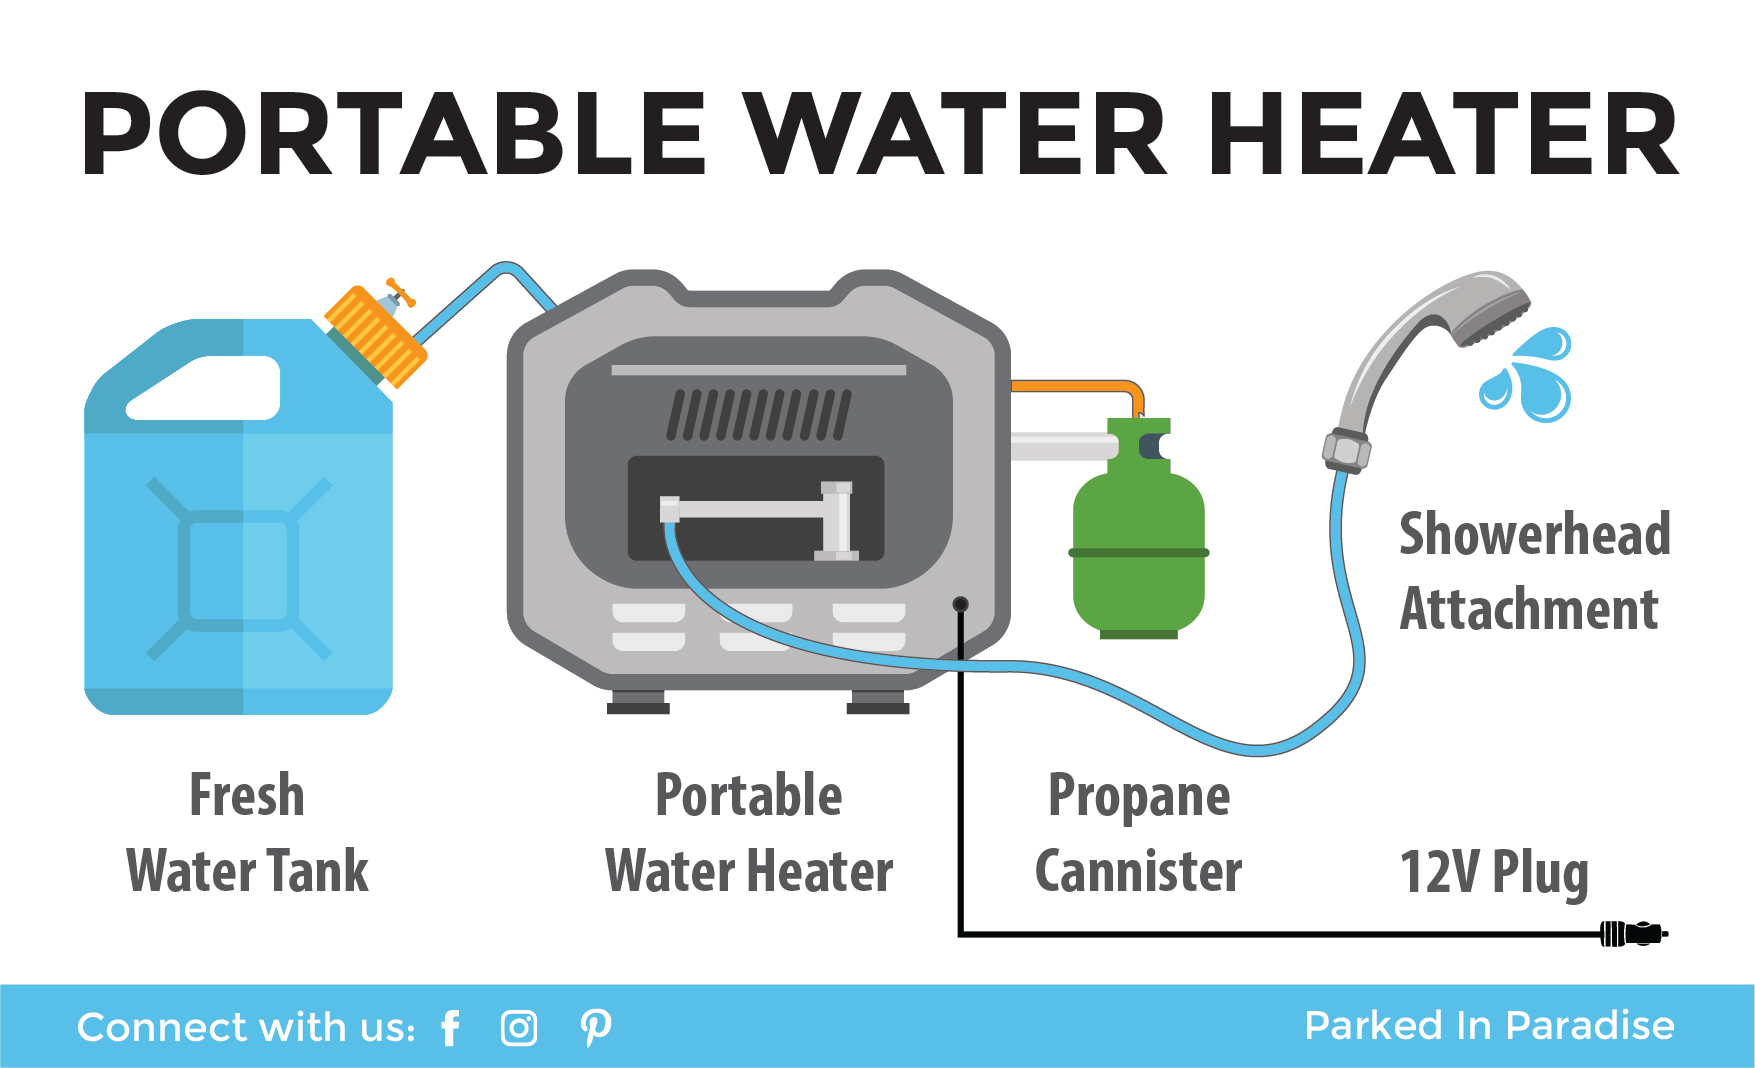 Parts of a camping portable water heater for showers and sinks